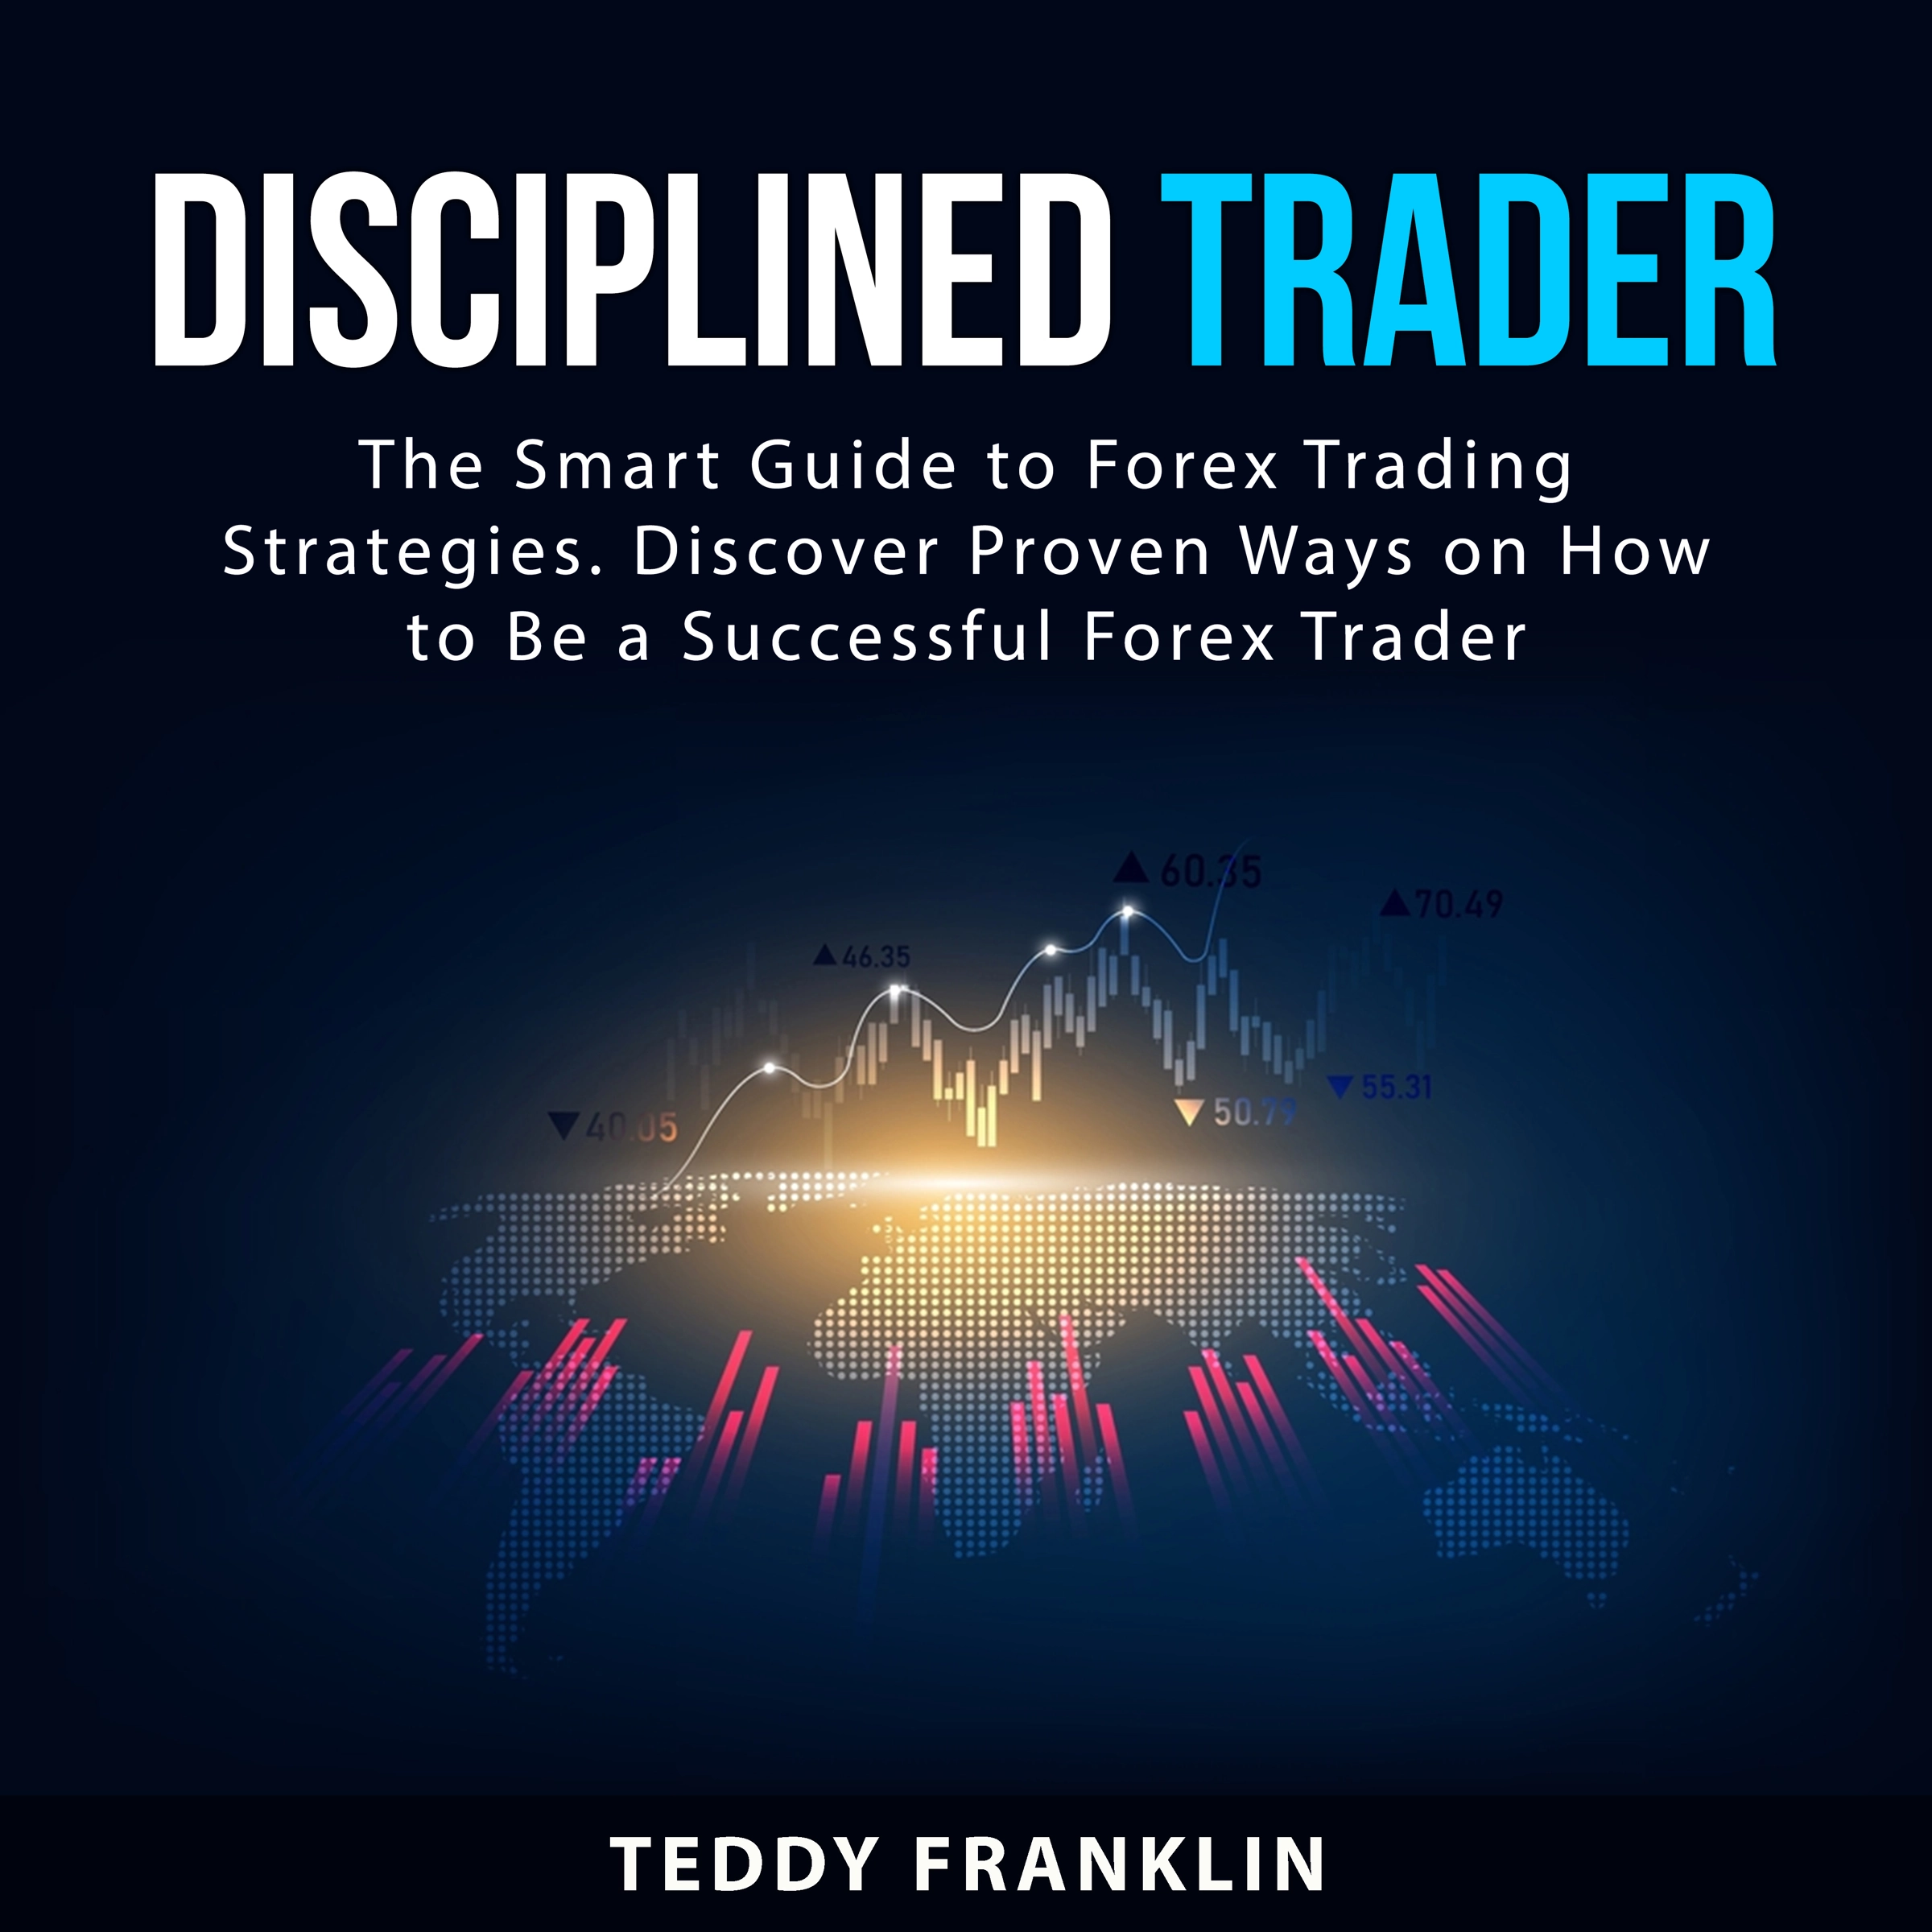 Disciplined Trader Audiobook by Teddy Franklin